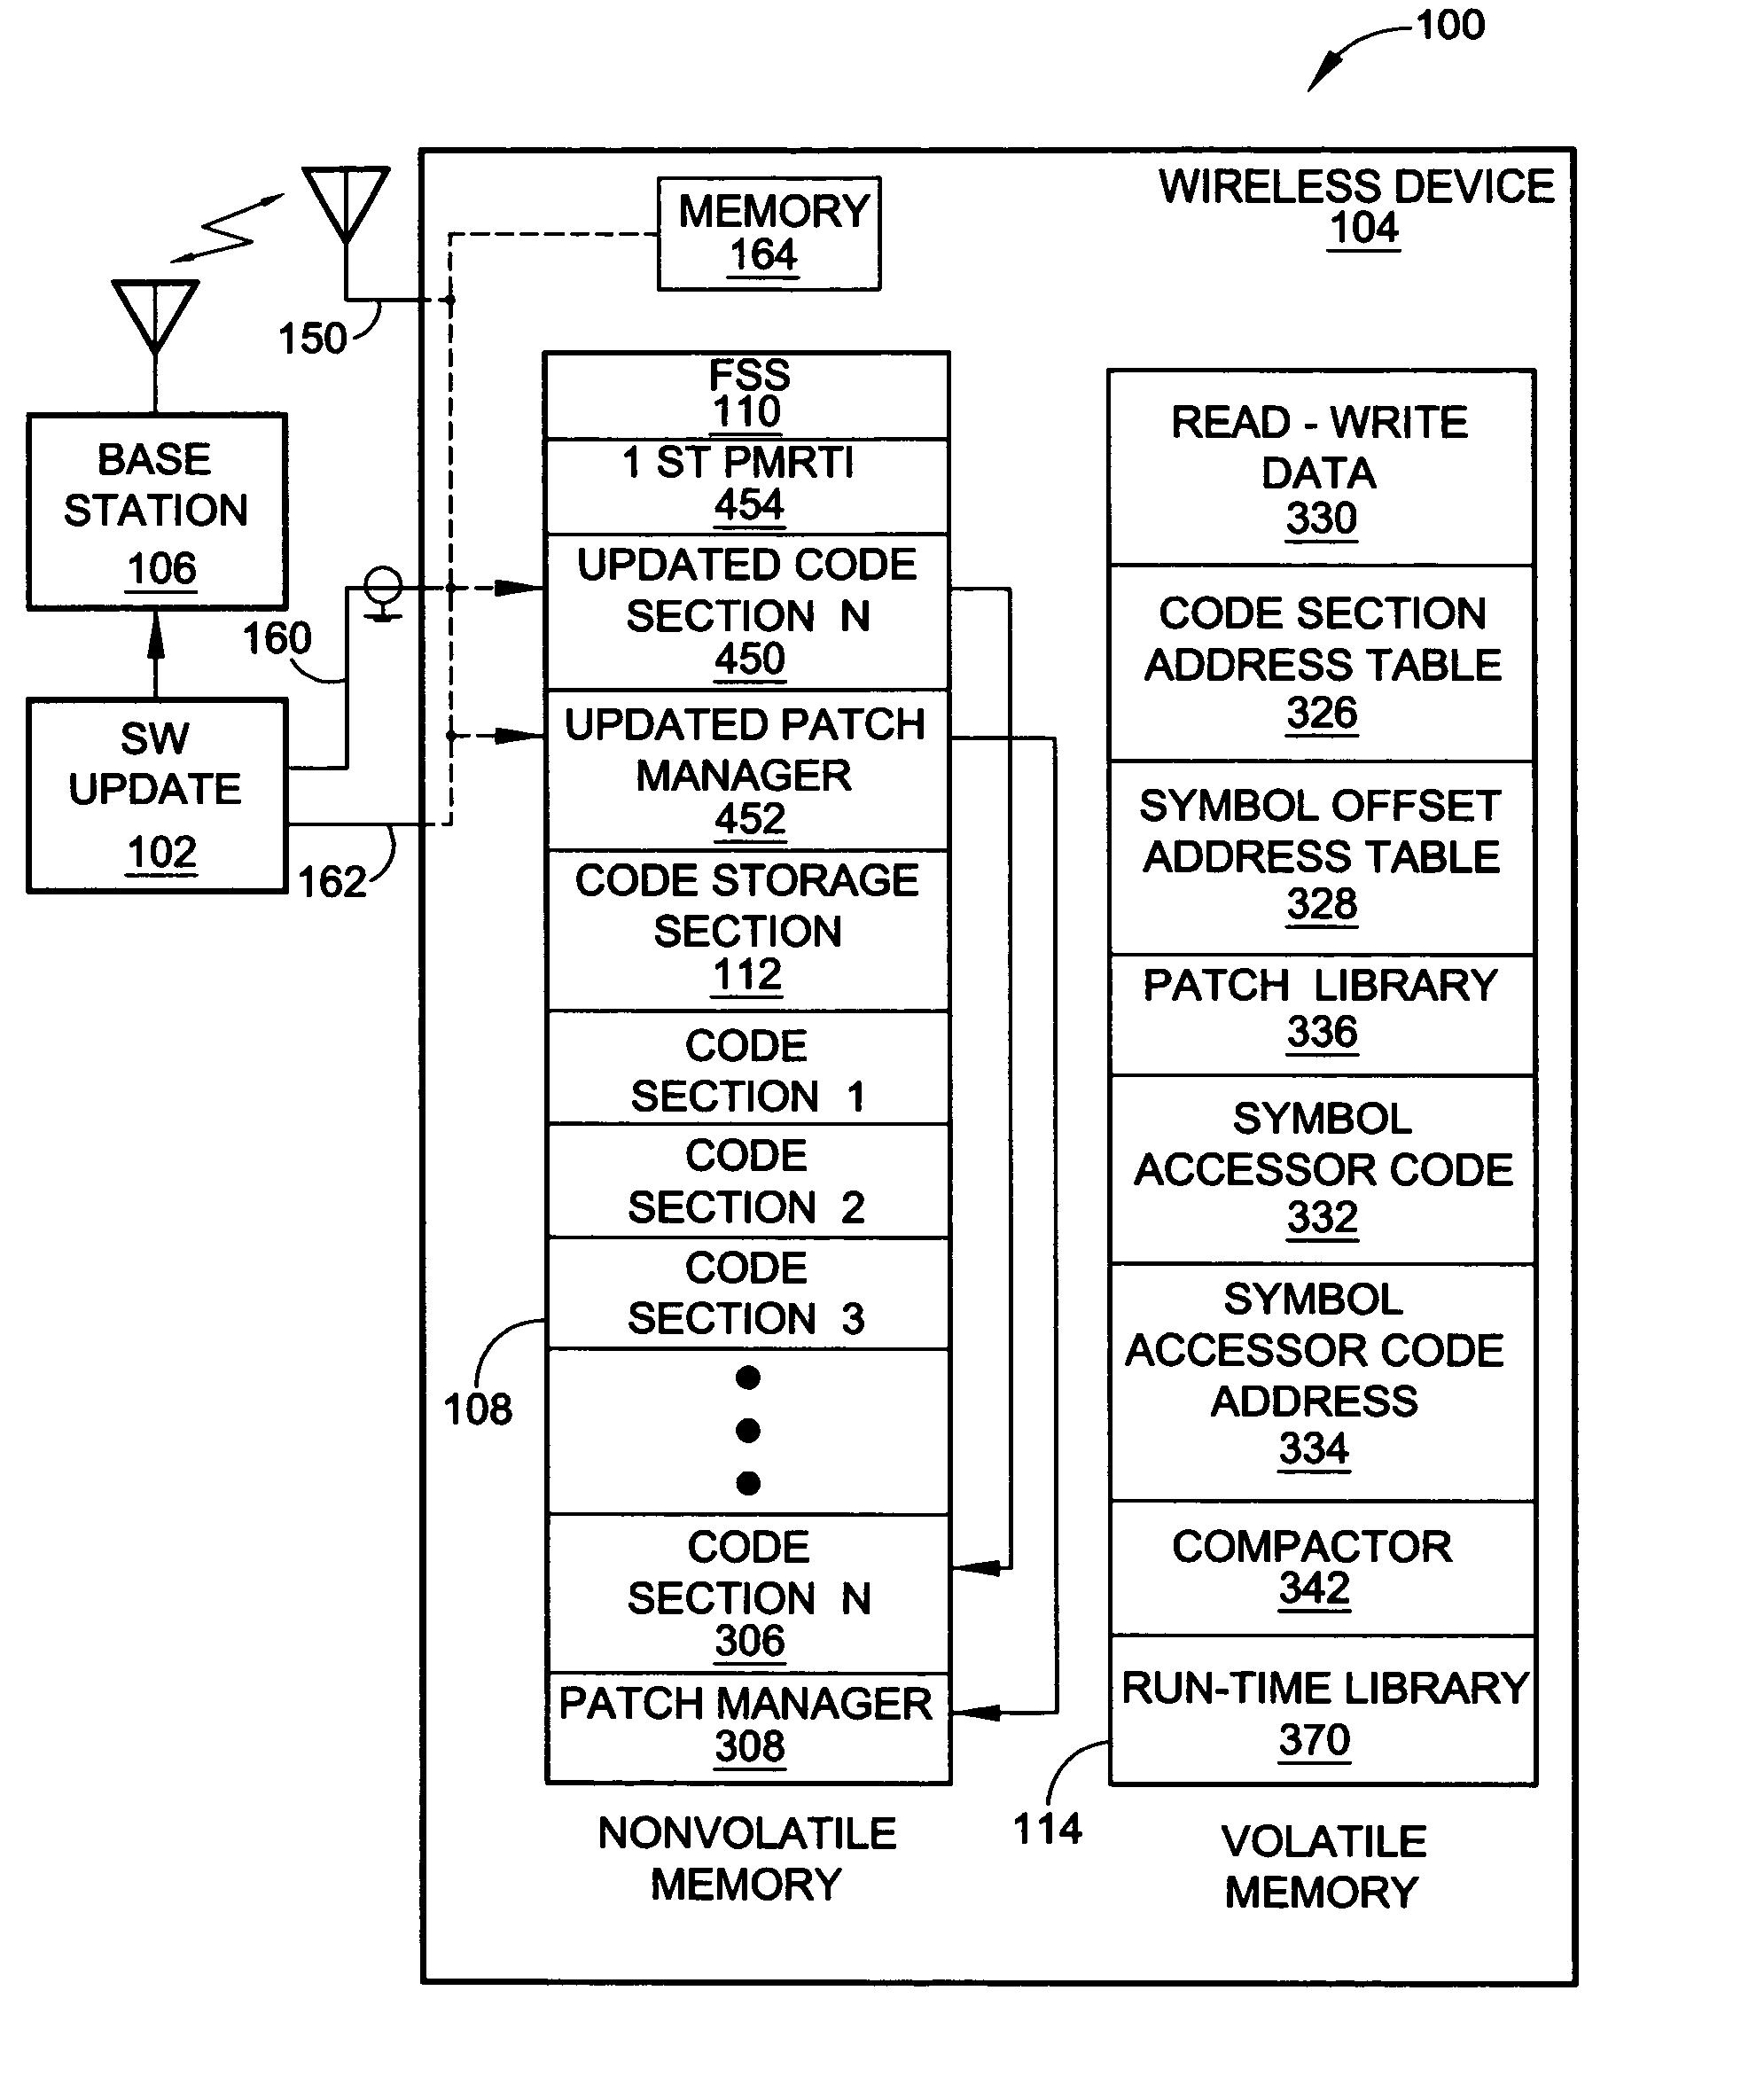 System and method for the management of wireless communications device system software downloads in the field